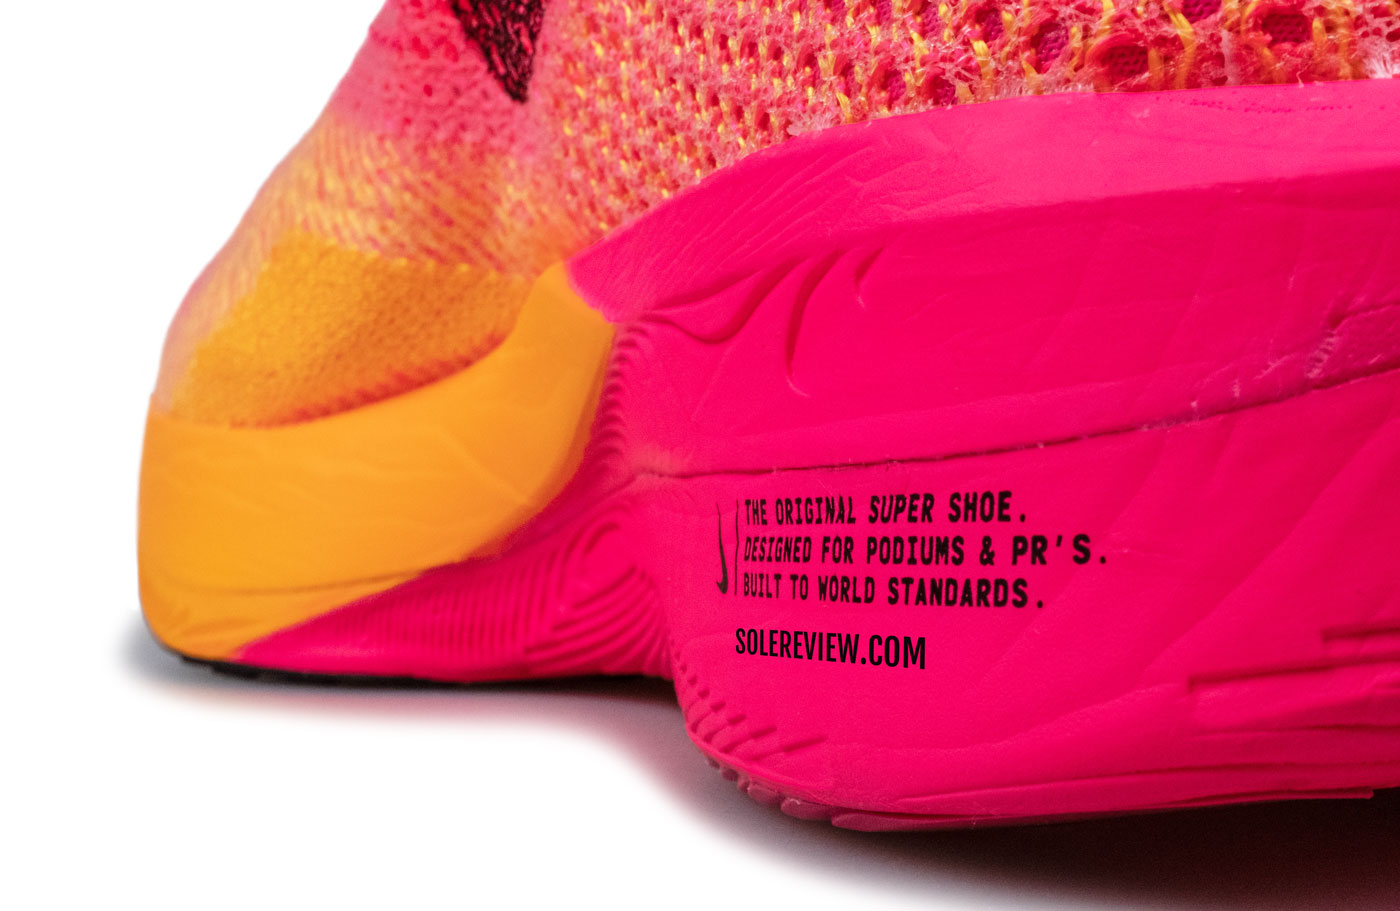 The midsole of the Nike Vaporfly 3.